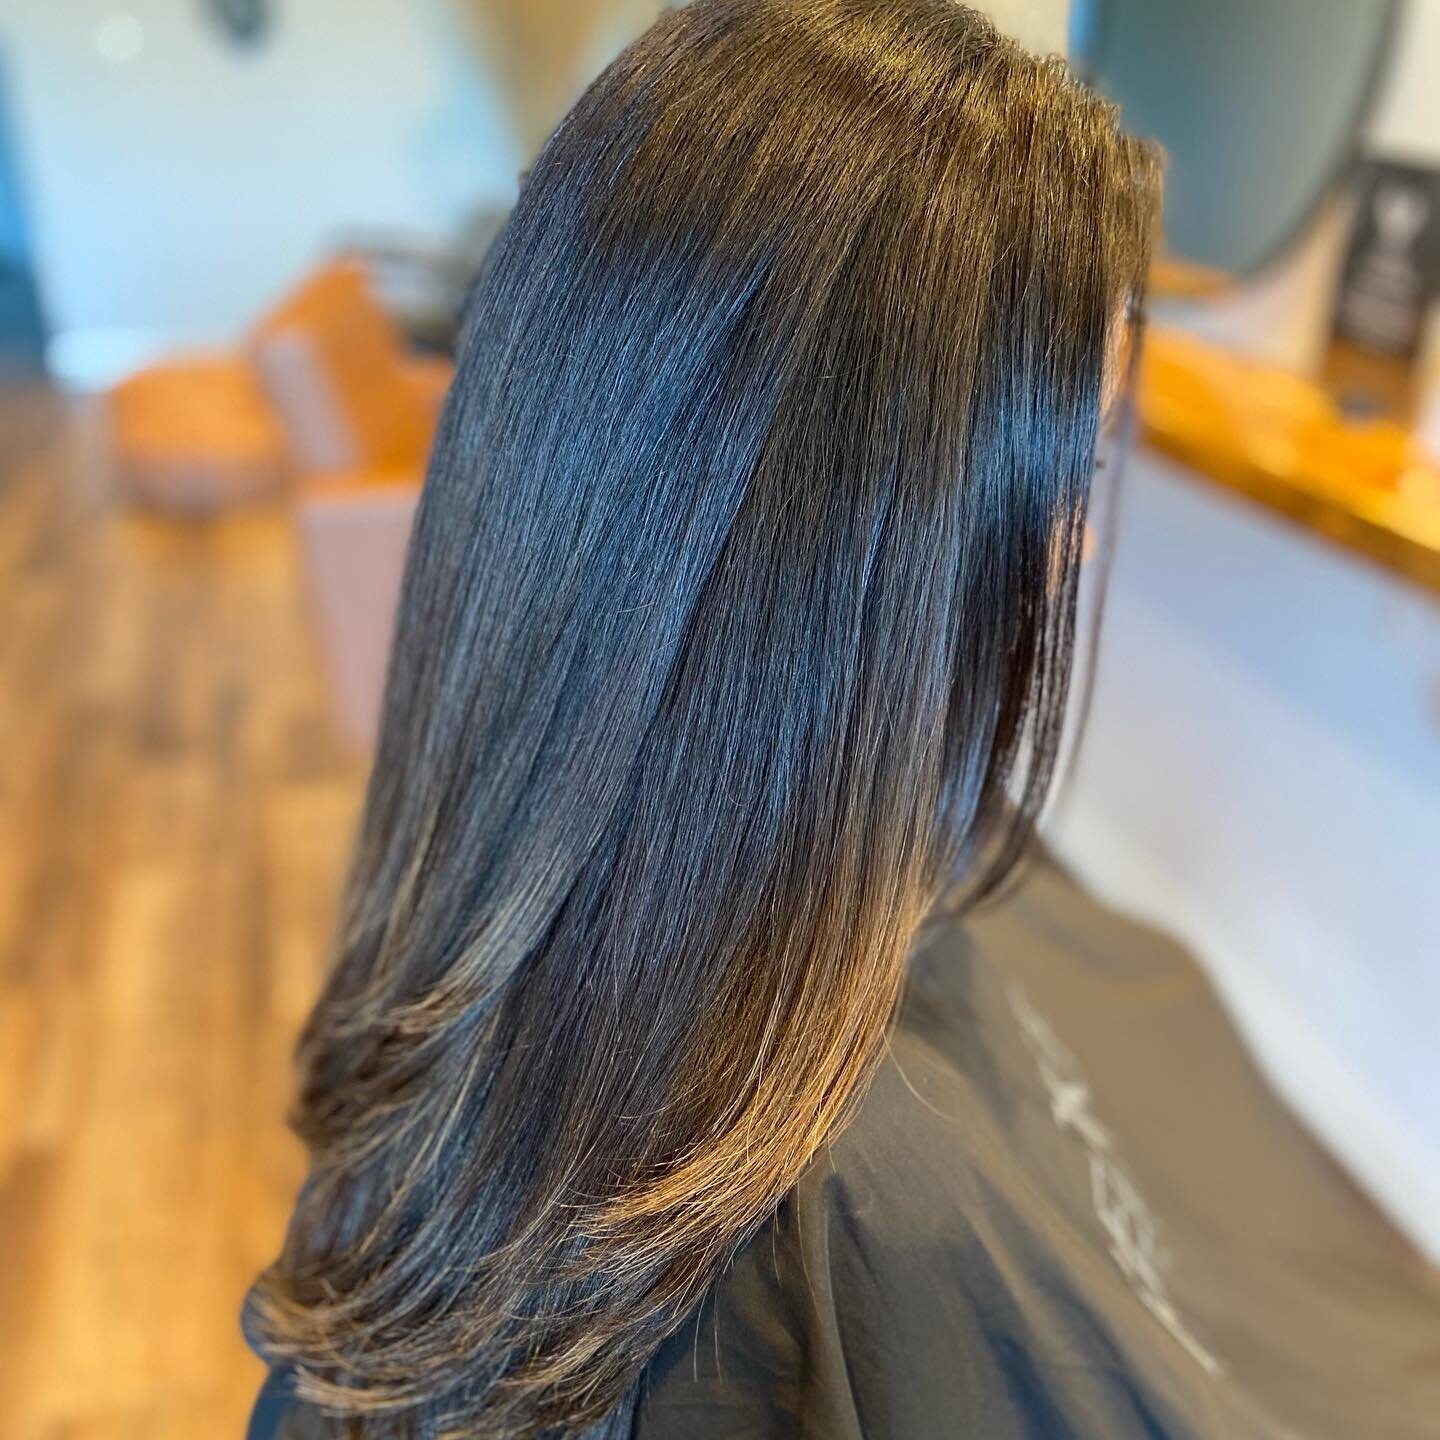 CHOPPED!
Only took about 1.5yrs to get a real haircut again, the thickest head of hair ever! Always a pleasure to spend the time and catch up 🤍
&bull;
&bull;
&bull;
&bull;
&bull;
#thickhair #brunette #hairstyles #haircuts #salon #products #styles #w